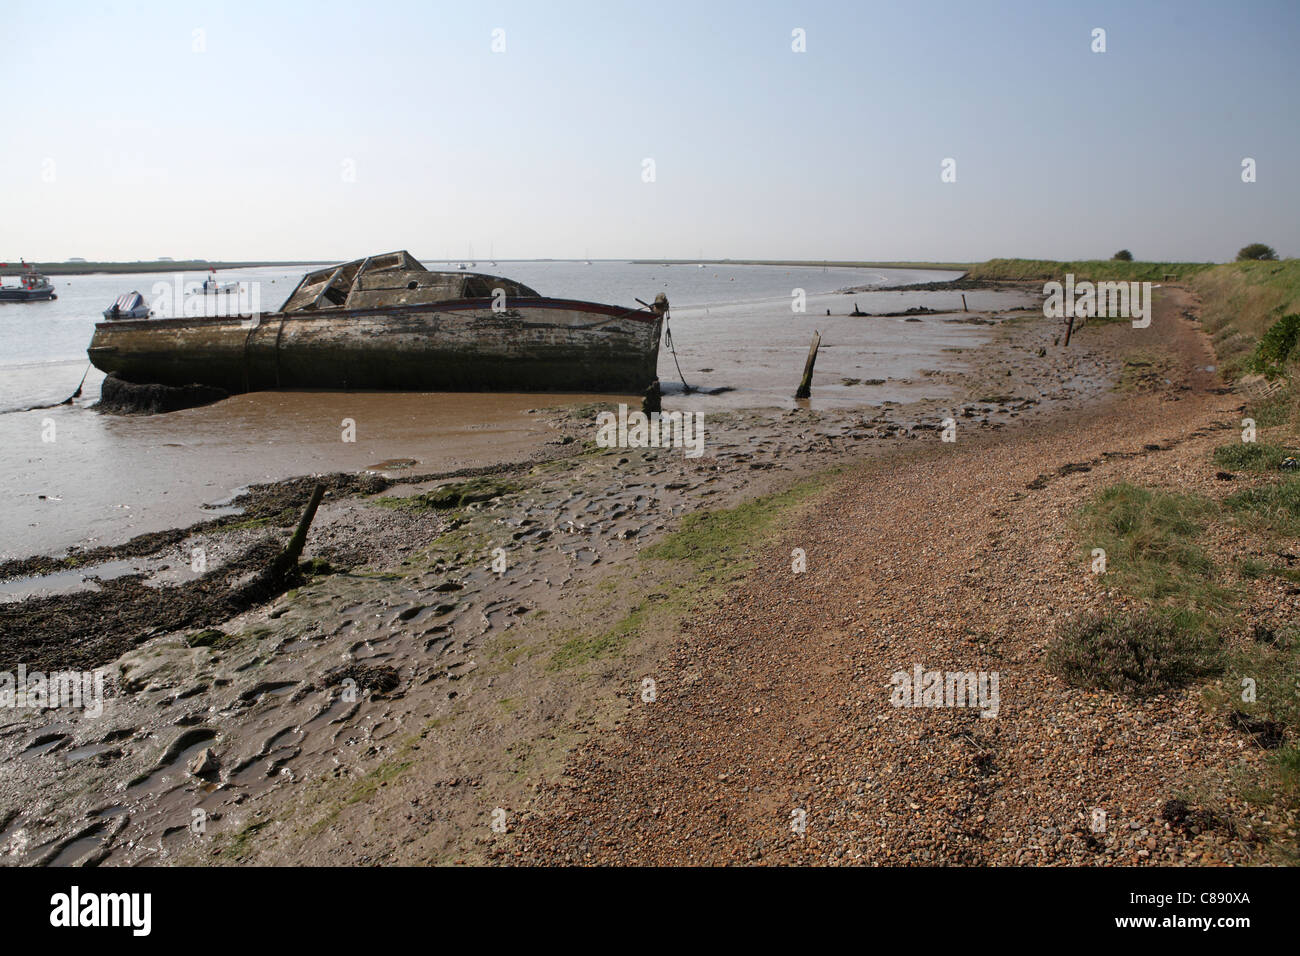 River Ore / Alde, bank / wall at Orford Suffolk, UK showing abandoned wooden boat in background Stock Photo